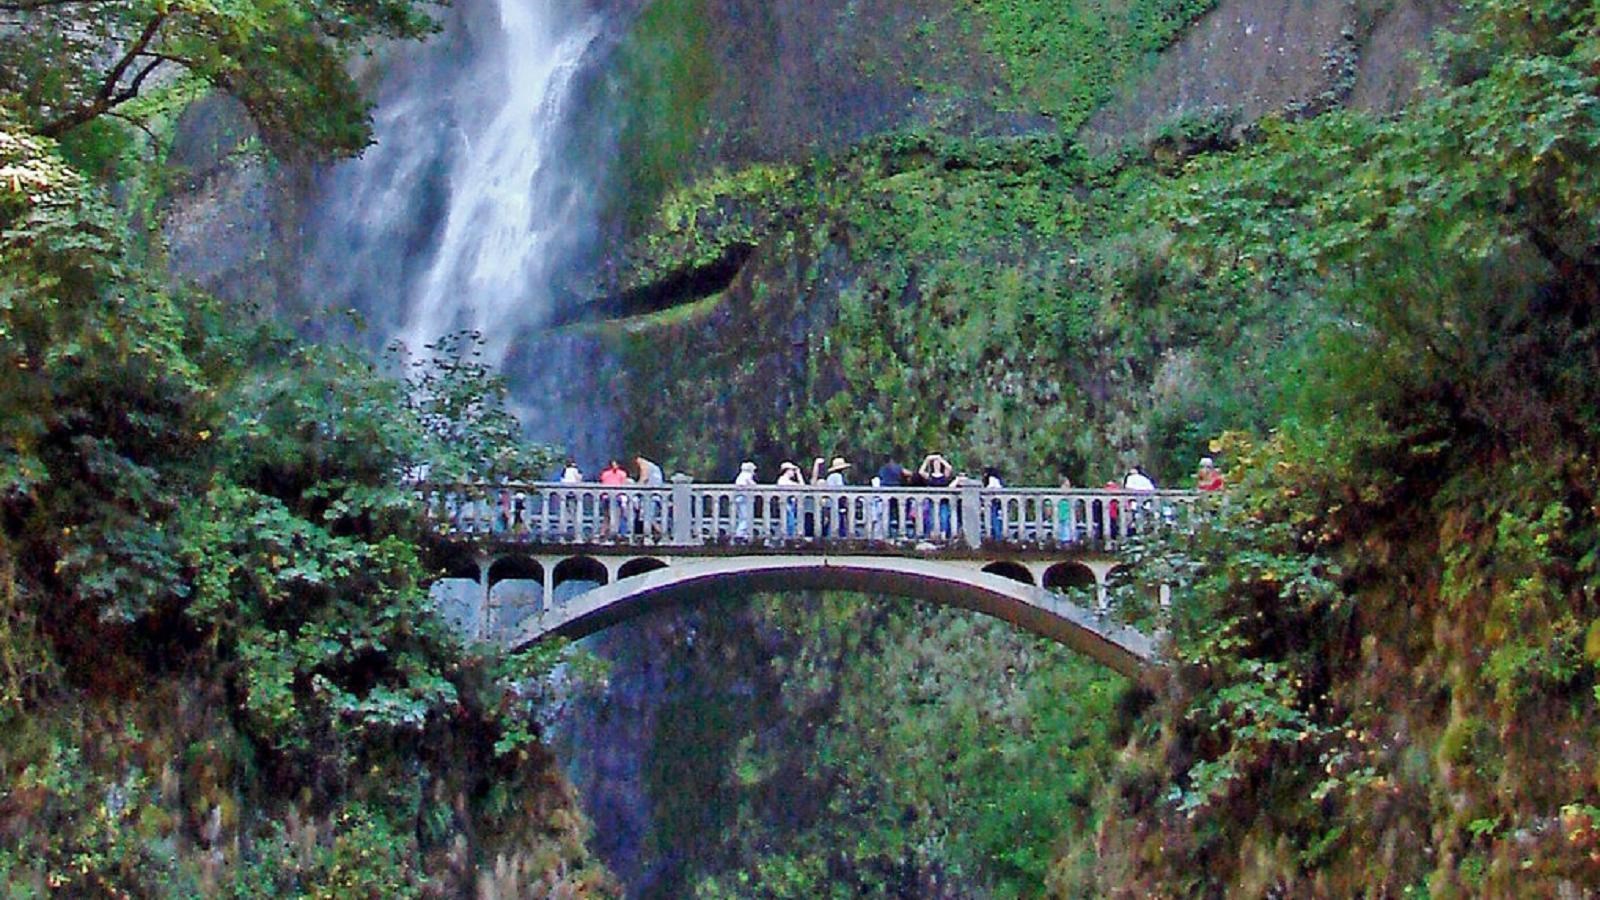 A bridge spans a gap in the trail in front of a high waterfall cascading down a mountain